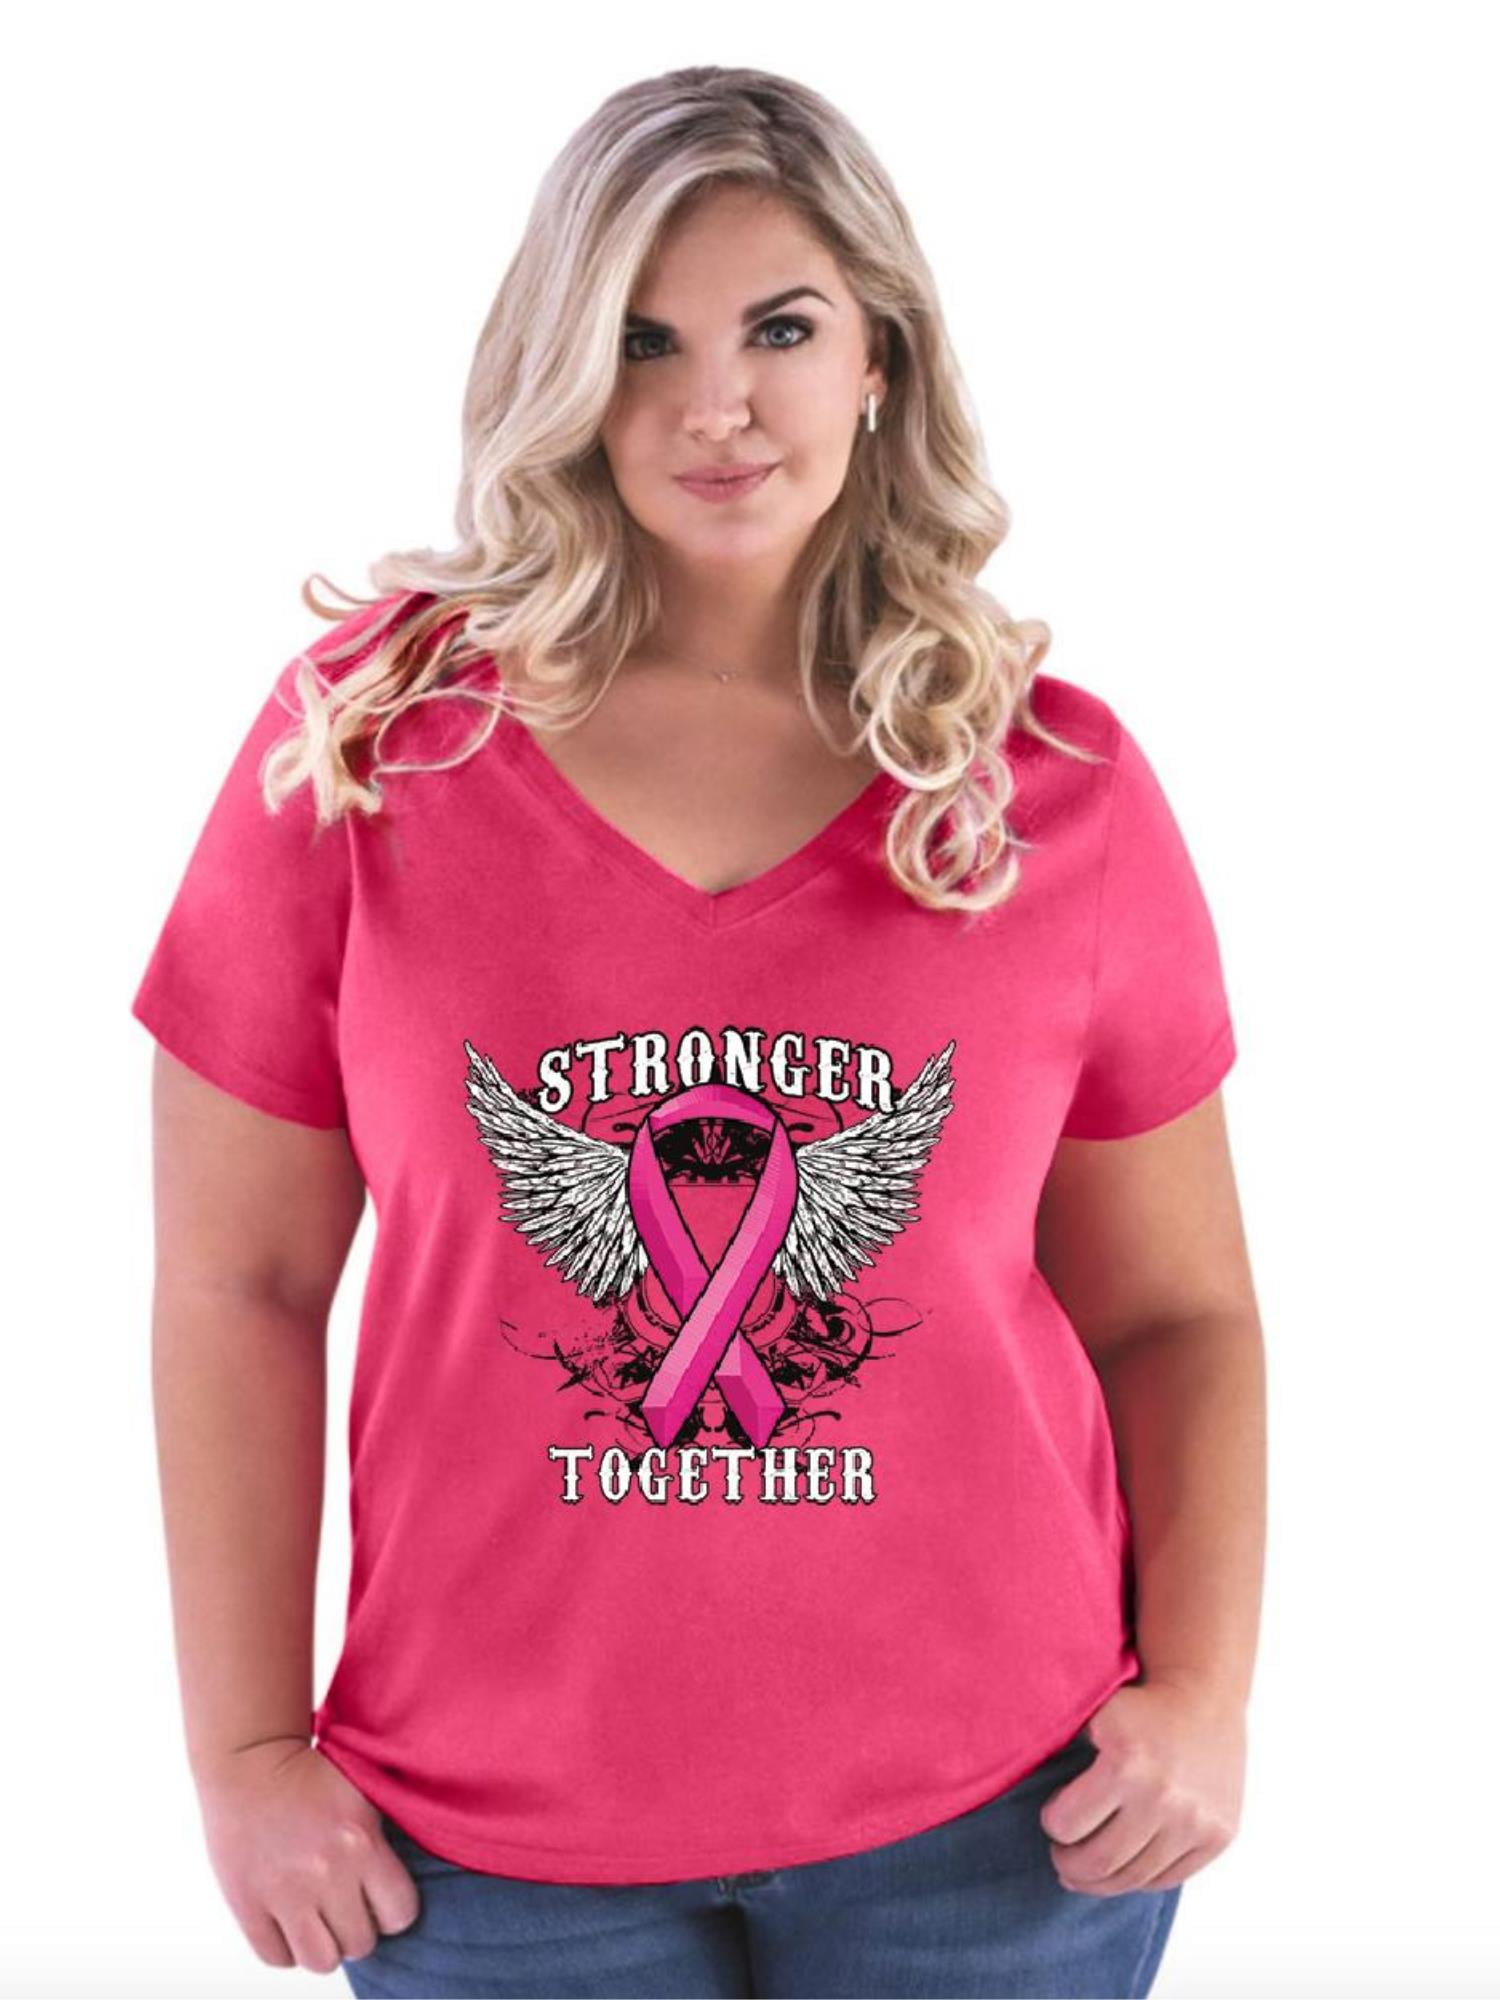 IWPF - Women's Plus Size V-neck T-Shirt, up to Size 28 - Stronger ...